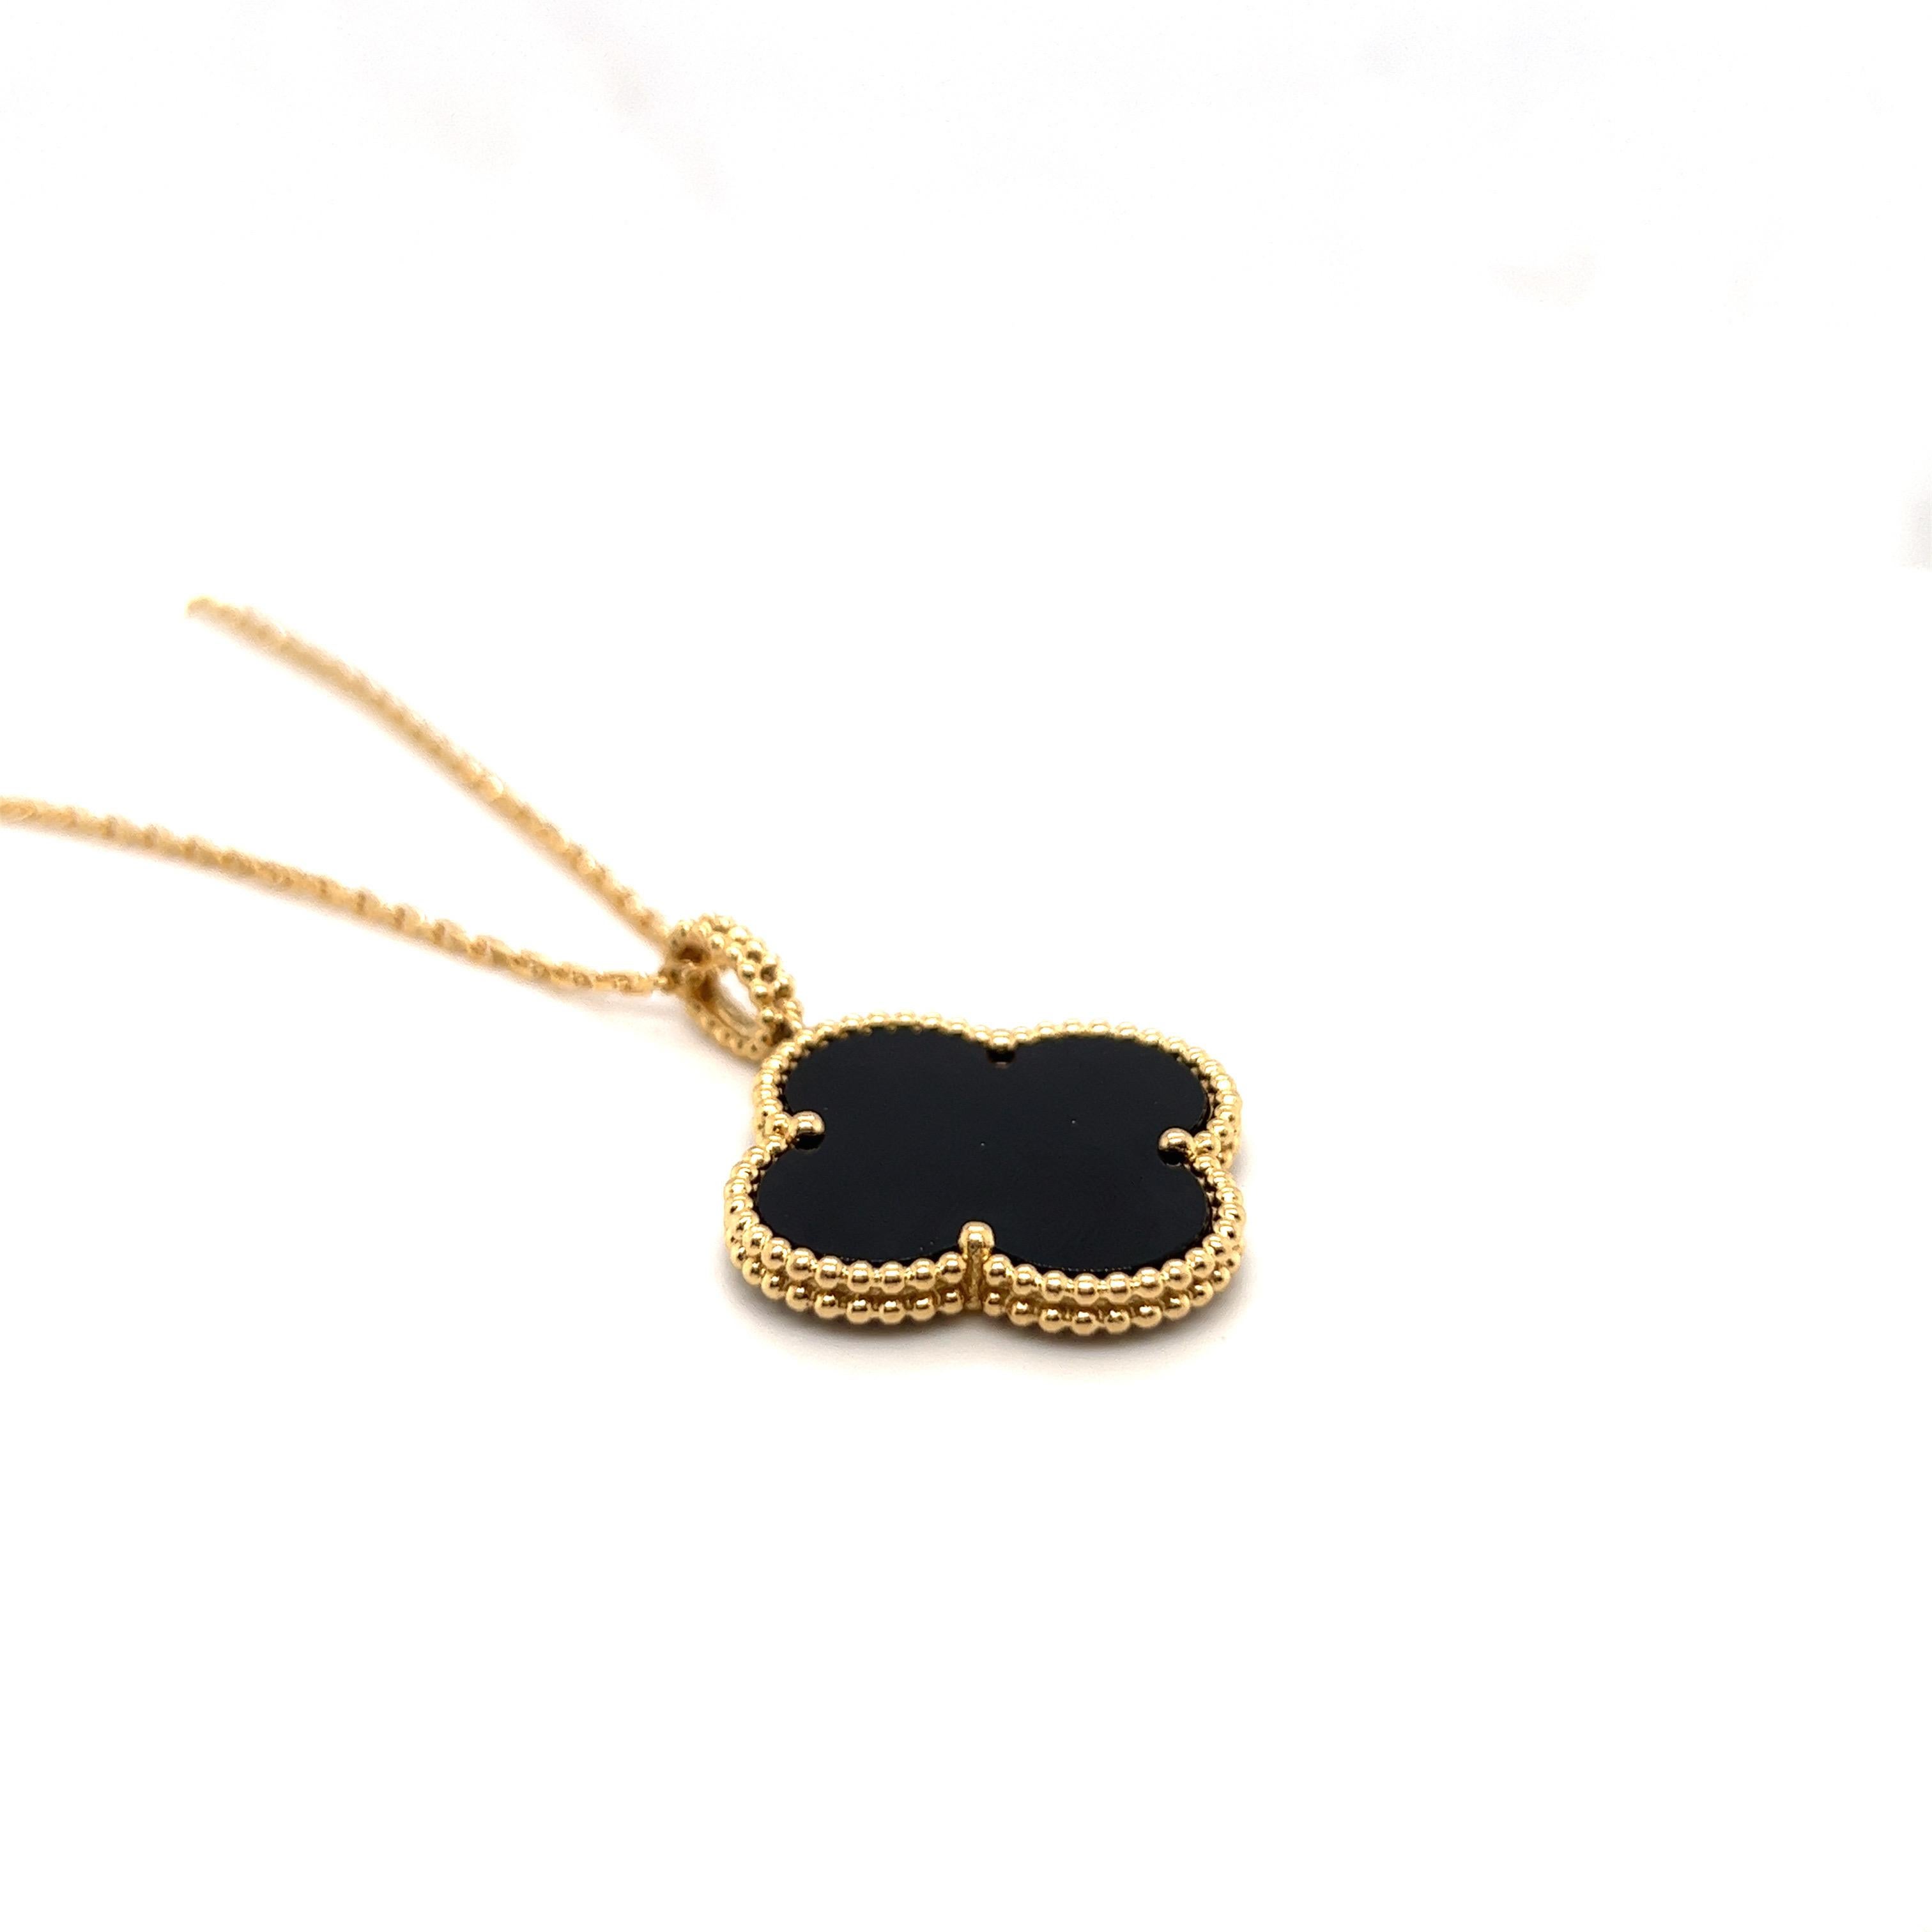 Chic Alhambra 18 karat gold and onyx pendant with long chain by renowned jeweller Van Cleef & Arpels. 
This modern classic pendant is designed as a quatrefoil-shaped onyx panel within a beaded gold surround, to an oval bail with gold bead decor.